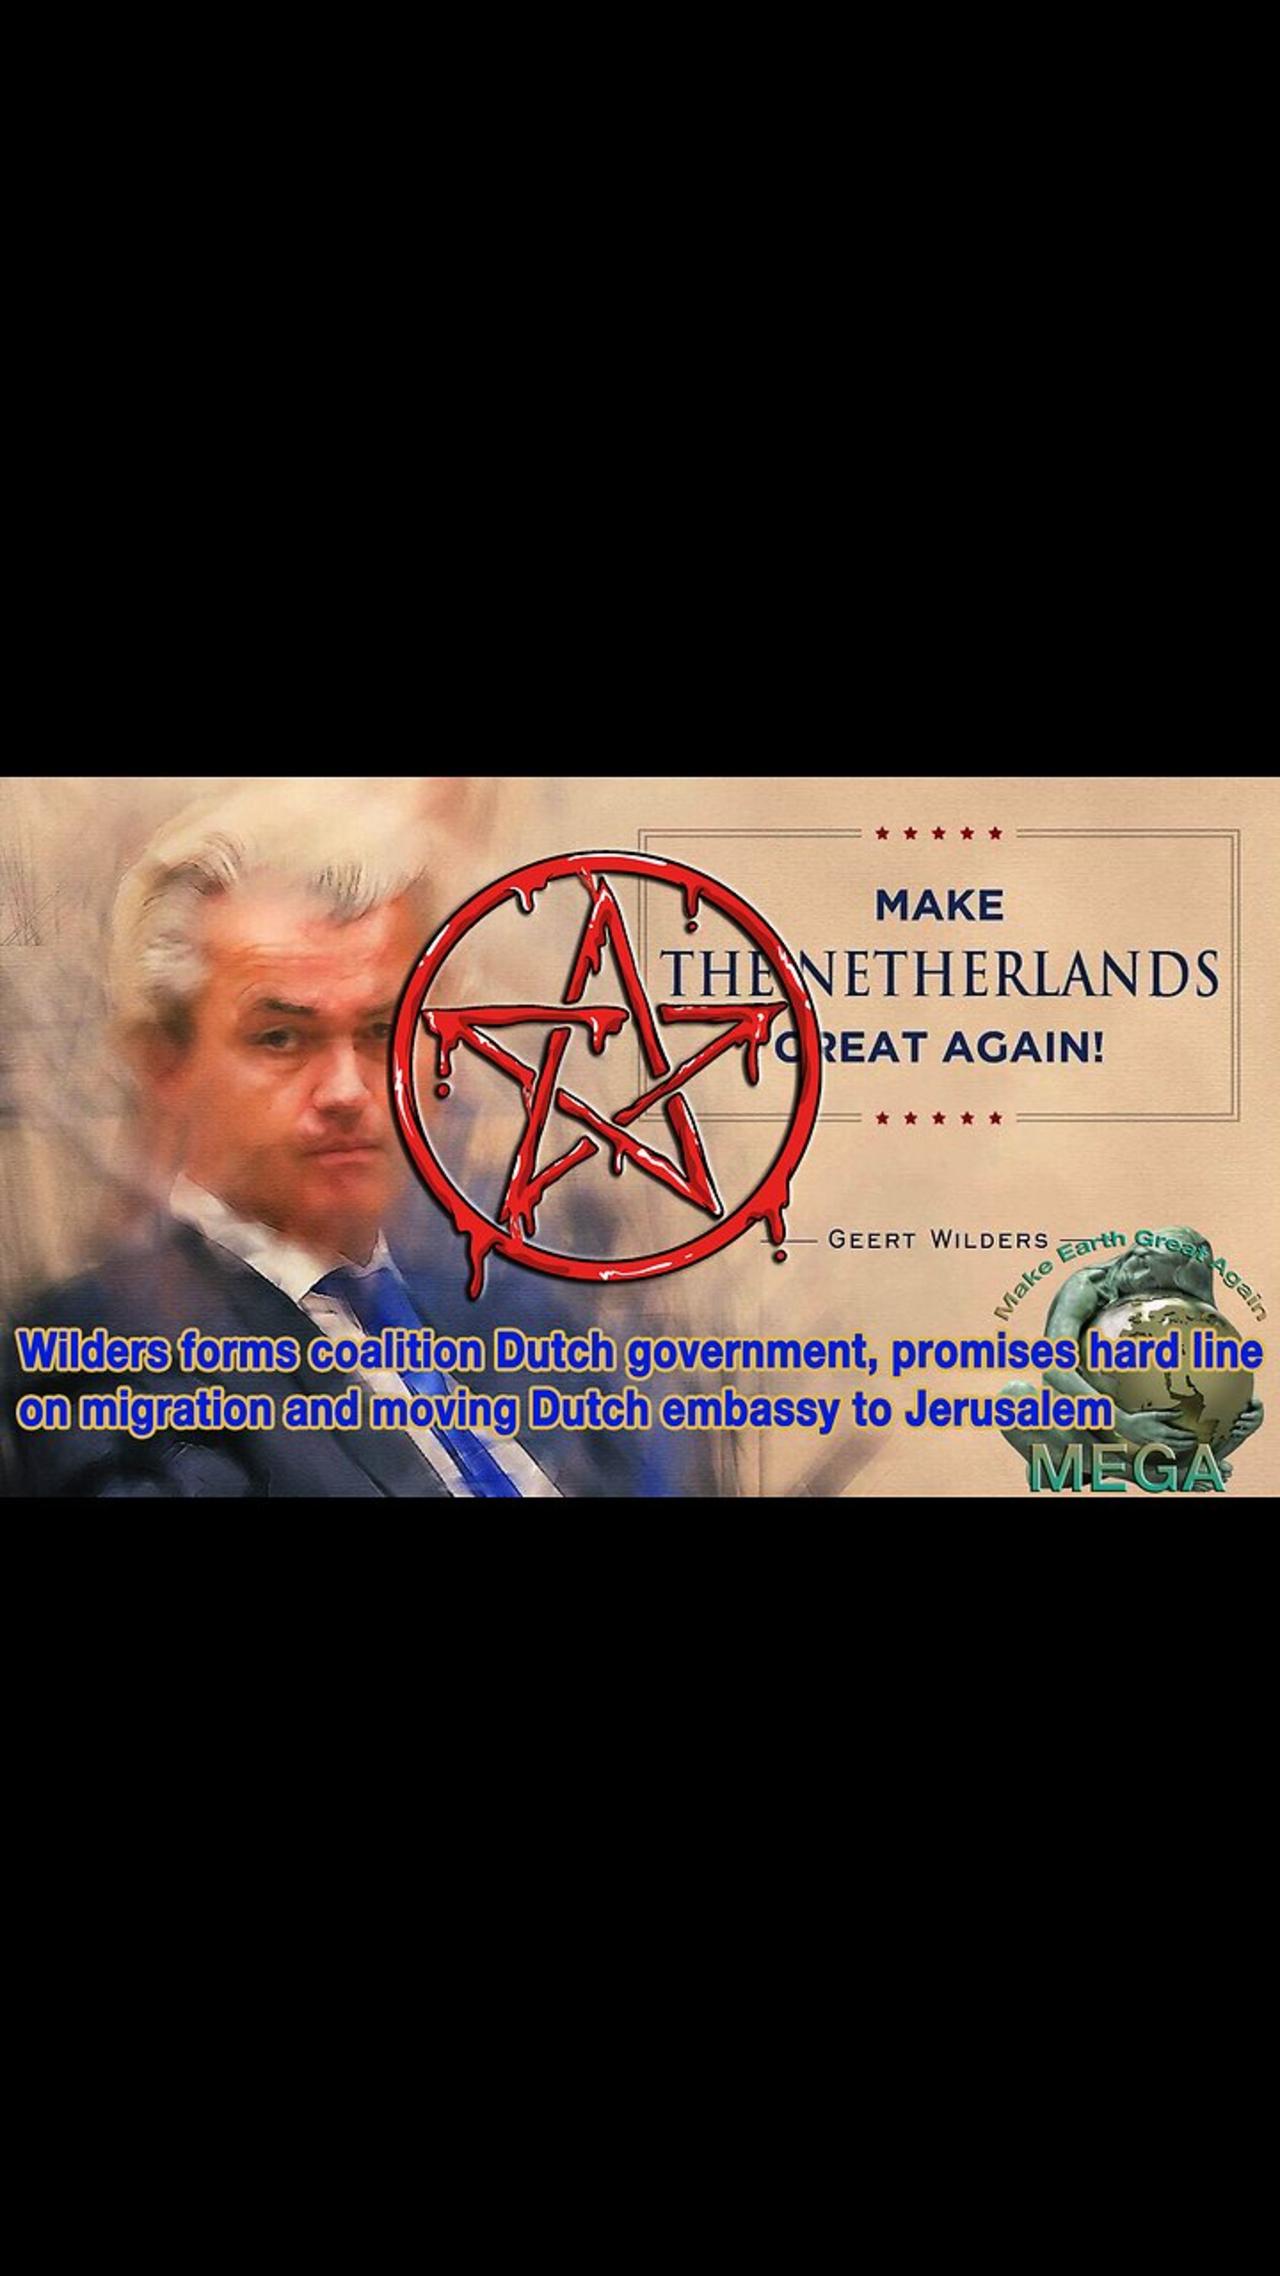 Wilders forms coalition Dutch "government", promises hard line on migration and moving Dutch embassy to Jerusalem